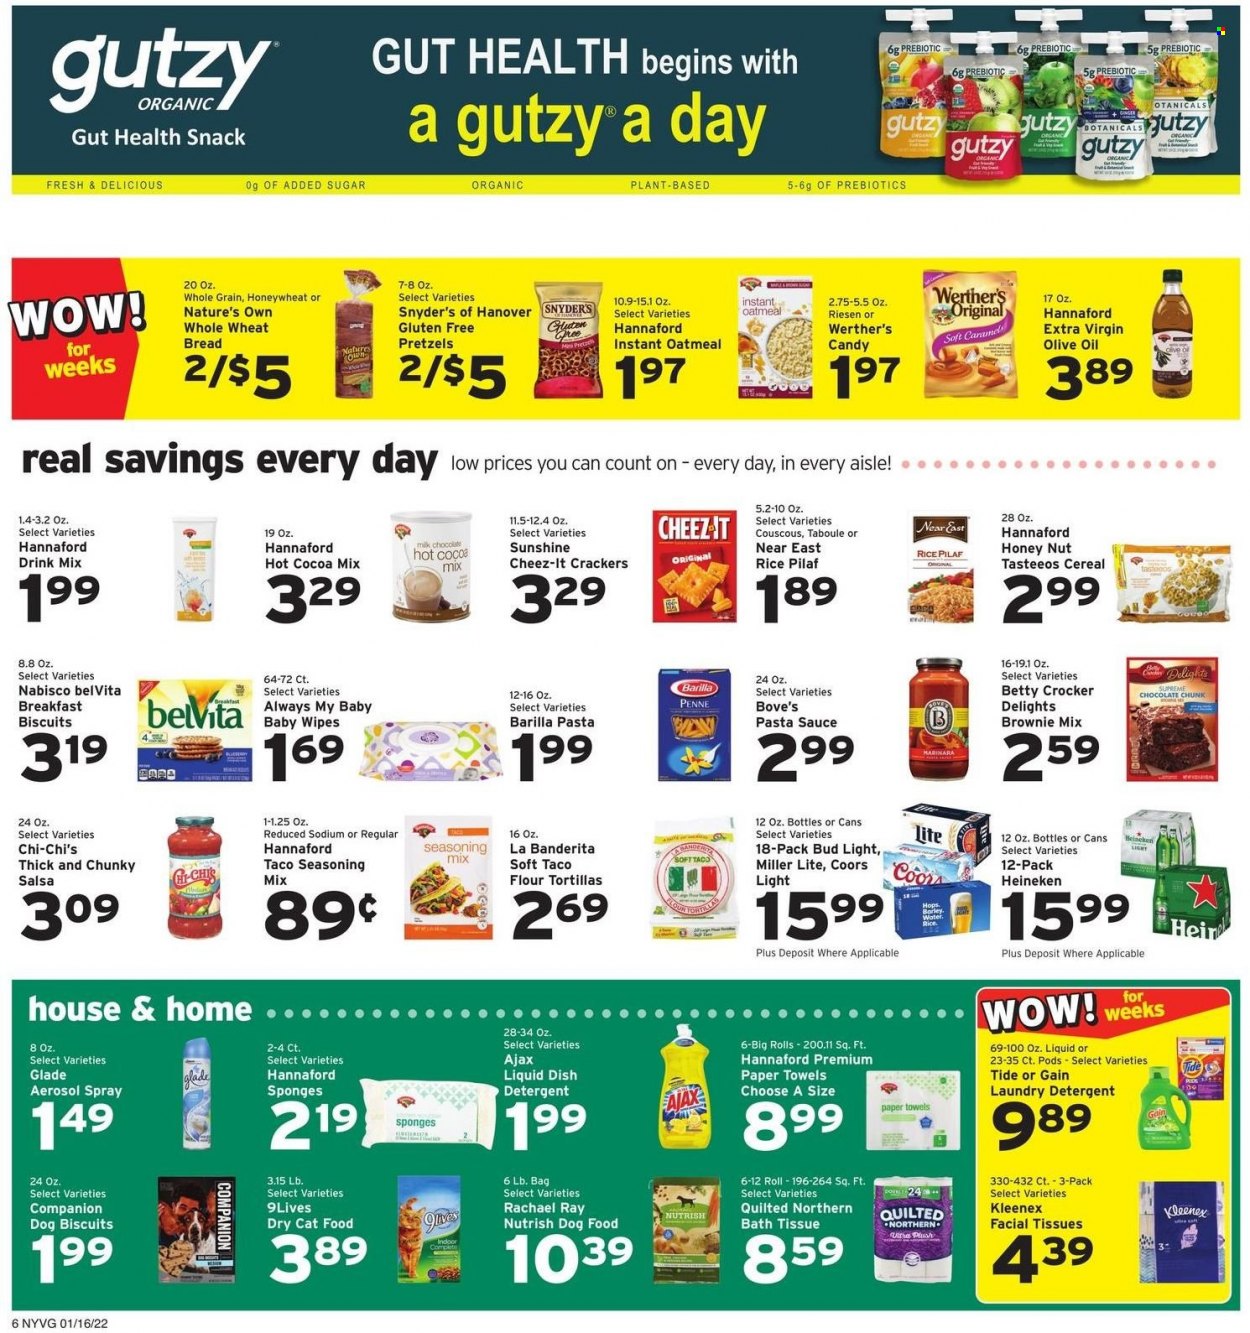 thumbnail - Hannaford Flyer - 01/16/2022 - 01/22/2022 - Sales products - bread, tortillas, pretzels, flour tortillas, brownie mix, pasta sauce, sauce, Barilla, Sunshine, milk chocolate, chocolate, snack, crackers, Cheez-It, oatmeal, cereals, belVita, couscous, rice, penne, spice, salsa, extra virgin olive oil, olive oil, oil, hot cocoa, hot chocolate, beer, Bud Light, Heineken, wipes, baby wipes, bath tissue, Kleenex, Quilted Northern, kitchen towels, paper towels, detergent, Gain, Ajax, Tide, laundry detergent, facial tissues, sponge, Glade, animal food, animal treats, cat food, dog food, dog biscuits, 9lives, dry cat food, Nutrish, Nature's Own, Miller Lite, Coors. Page 6.